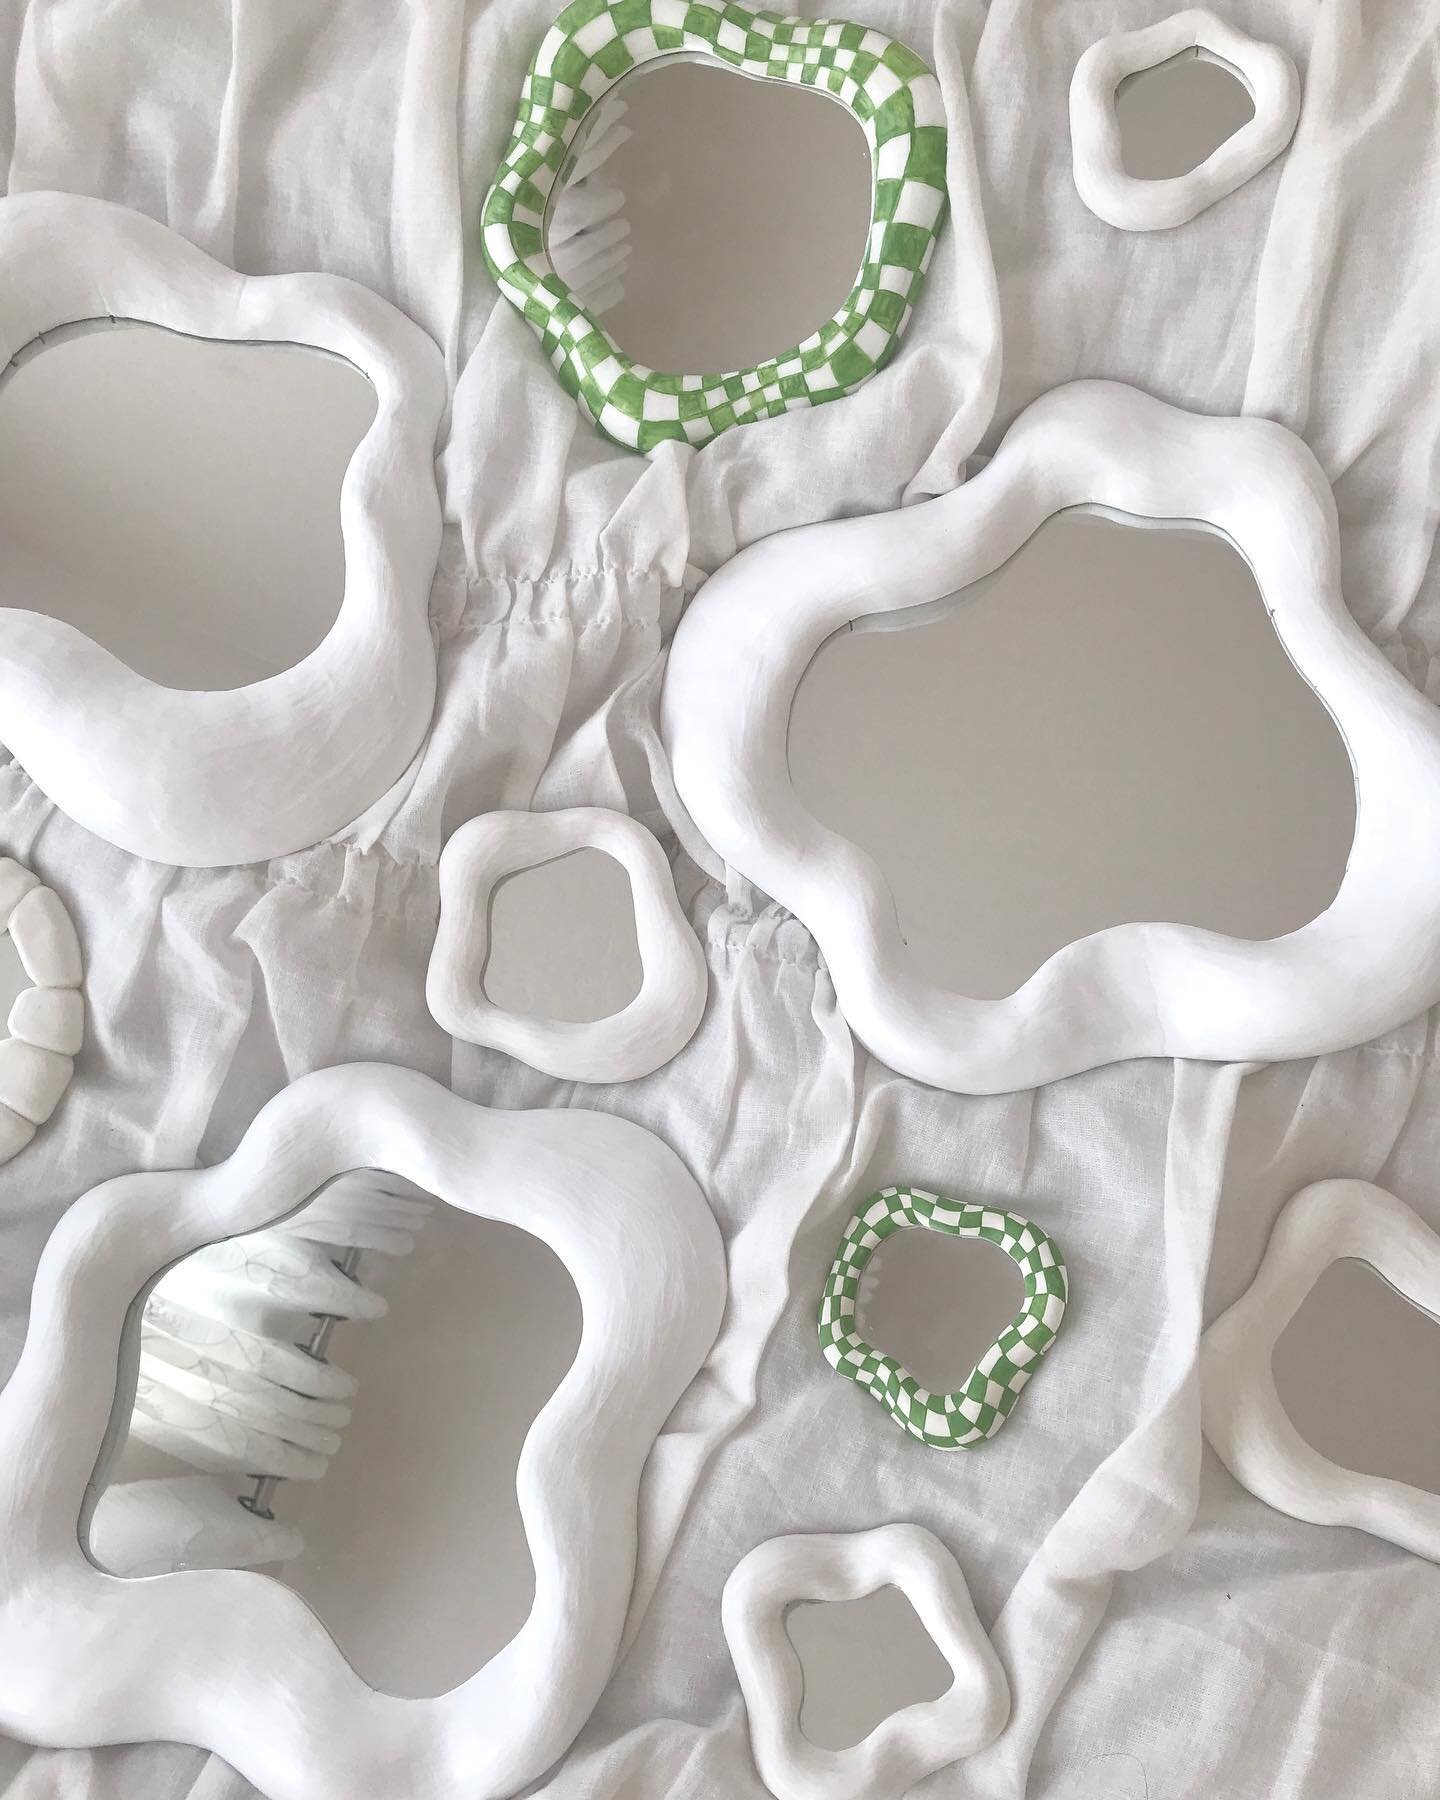 Can you ever have too many mirrors? I don&rsquo;t think so :)
.
.
.
Mirrors now on sale at the link in bio!
.
.
.
#diymirror #handmadehome #mirrordesign #mirrorinspo #handmade #ceramics #handmadedecor #makersgonnamake #interiordecor #mirrors #shopupd